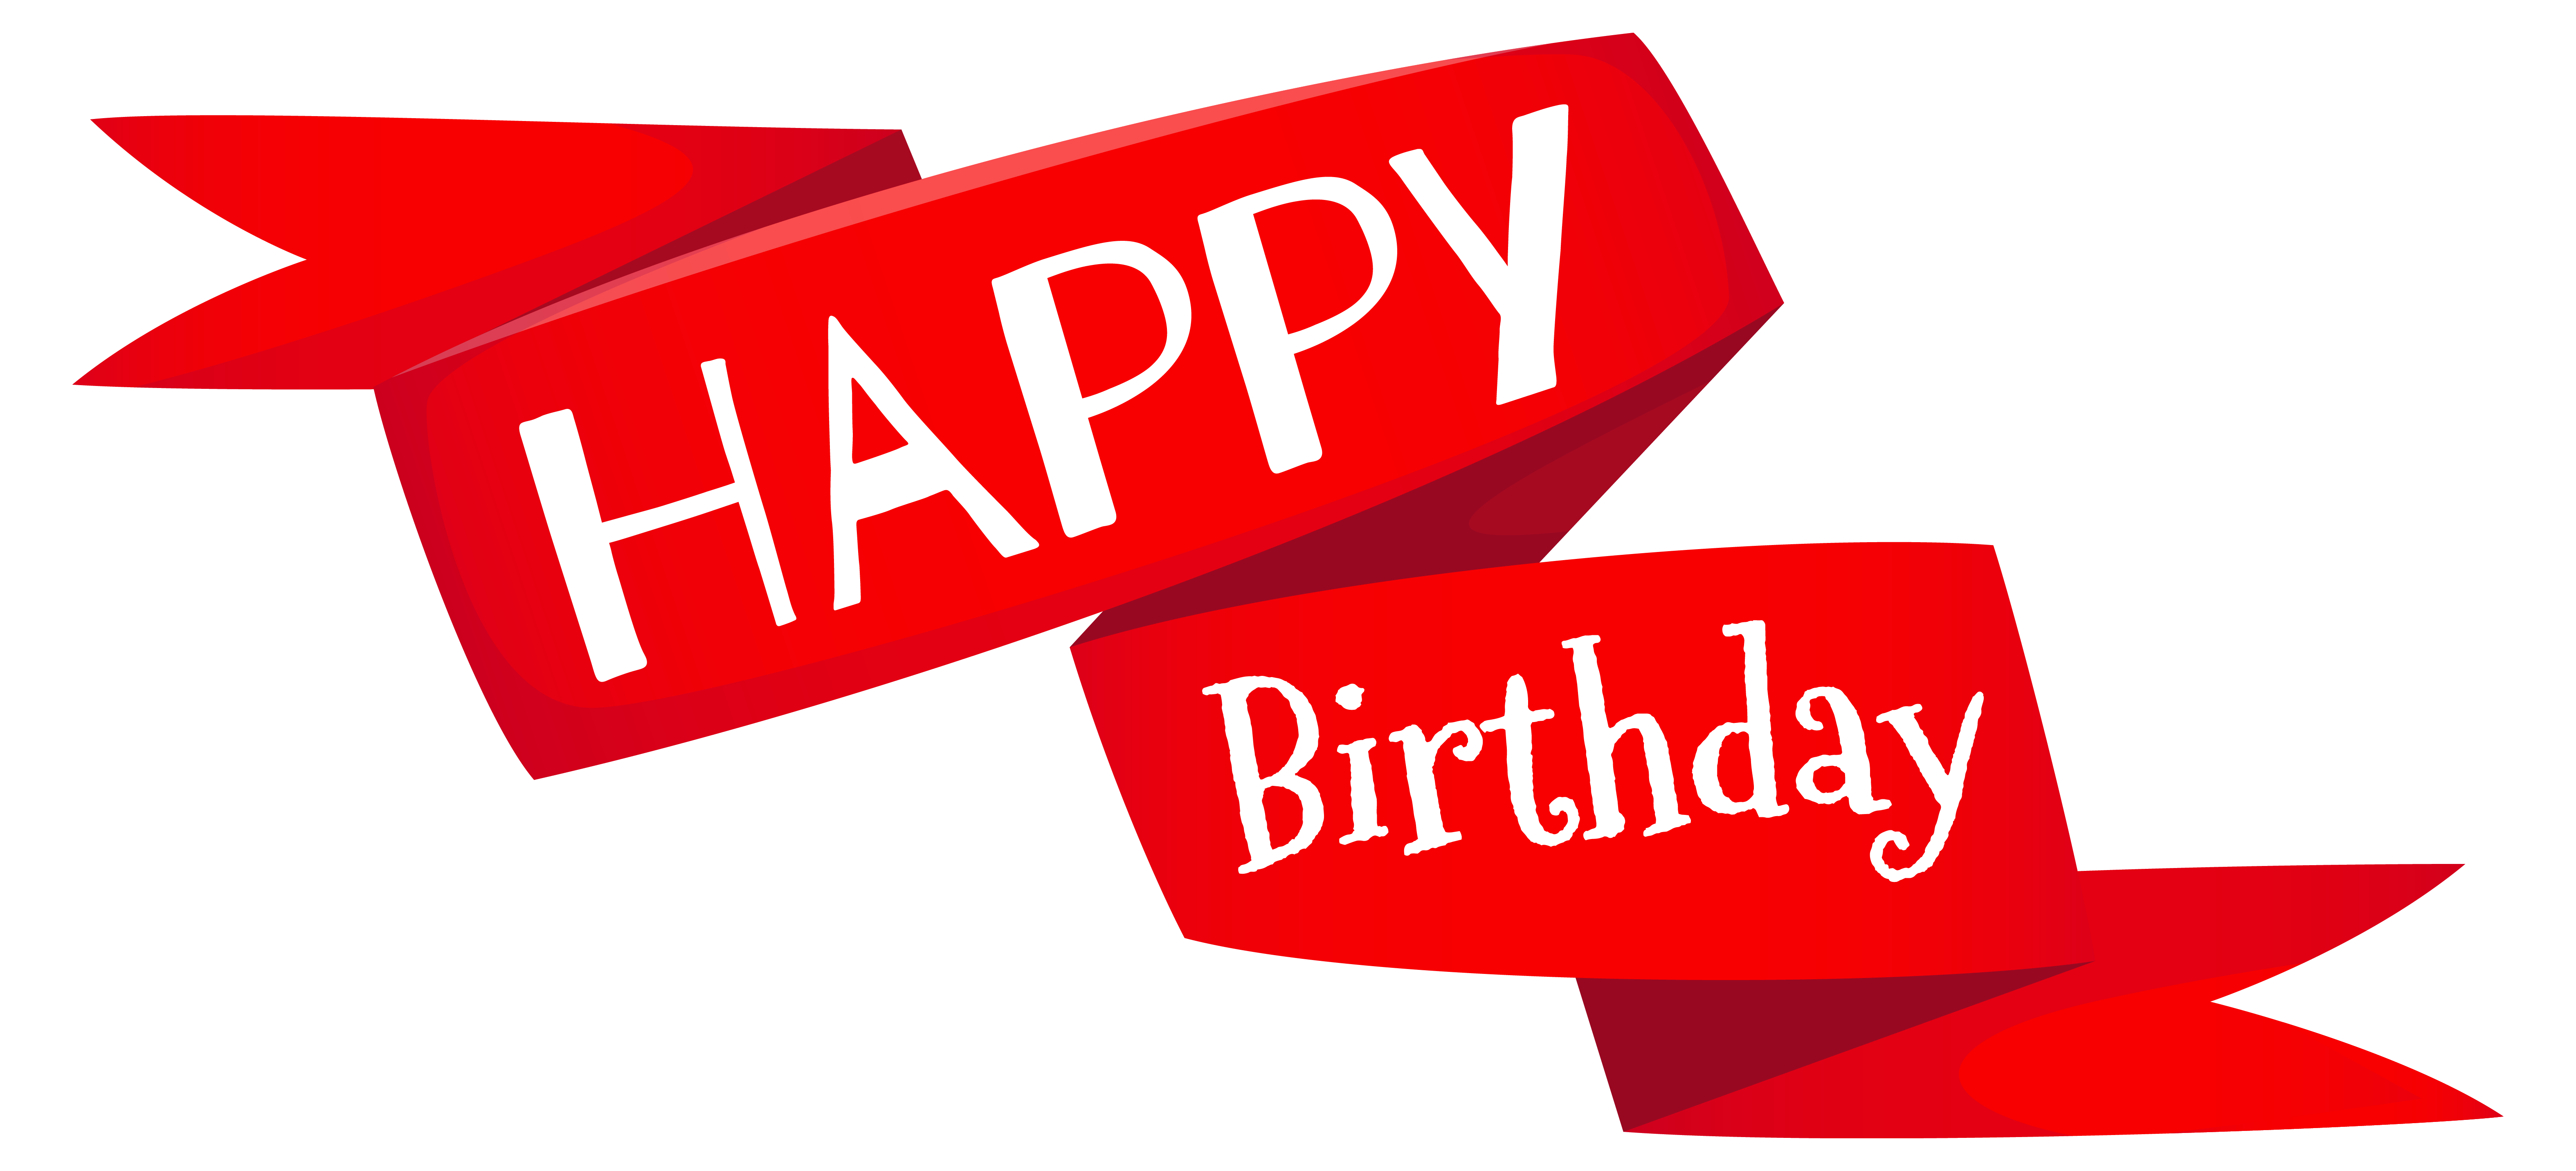 red-happy-birthday-banner-png-image-gallery-yopriceville-high-quality-free-images-and